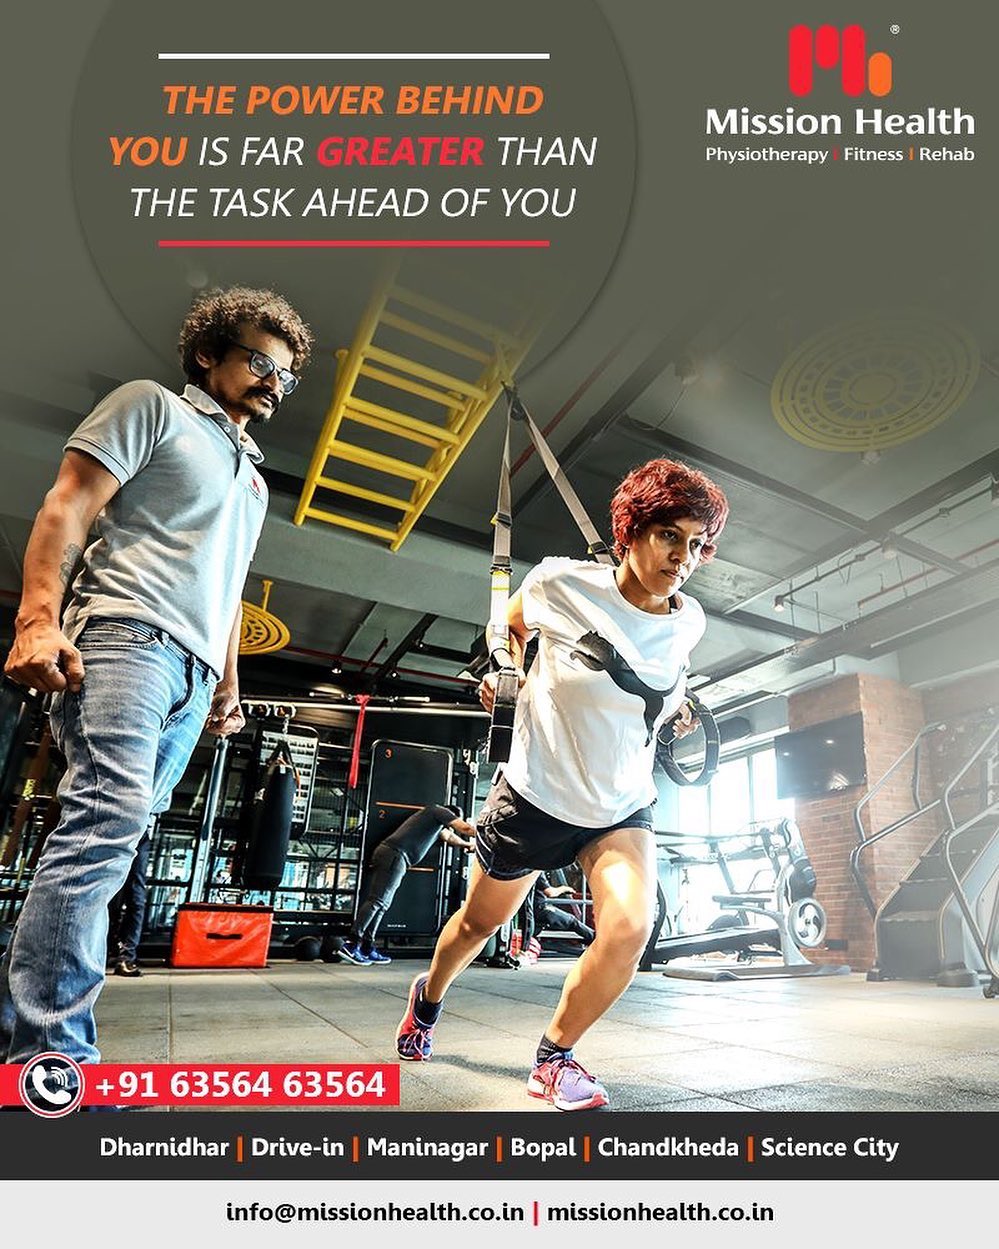 At the onset of this New Year, let us commit to “Fitness For Self”. Highly qualified and experienced trainers and instructors at Mission Health are equally committed to guiding you for your everyday workout and fitness sessions. 
#Fitnessgoals #Newyearresolution #Healthgoals #Fitnessmygoal #Myworkout #Customisedworkouts #Personalfitnesssession #MissionHealth #MissionHealthIndia #MovementIsLife #AbilityClinic